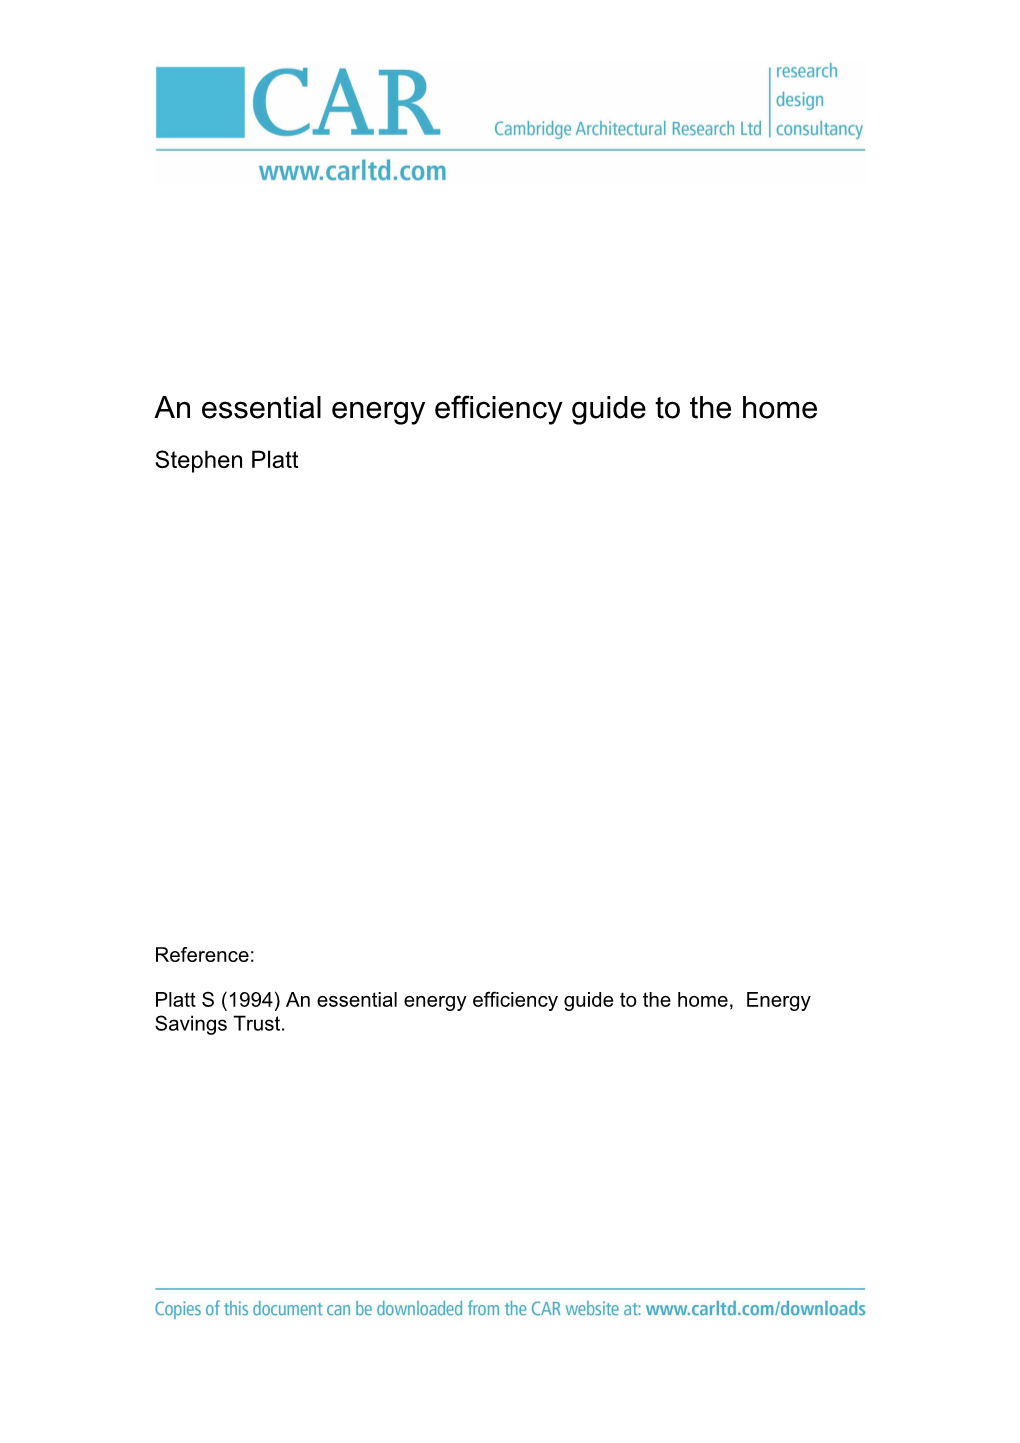 An Essential Energy Efficiency Guide to the Home